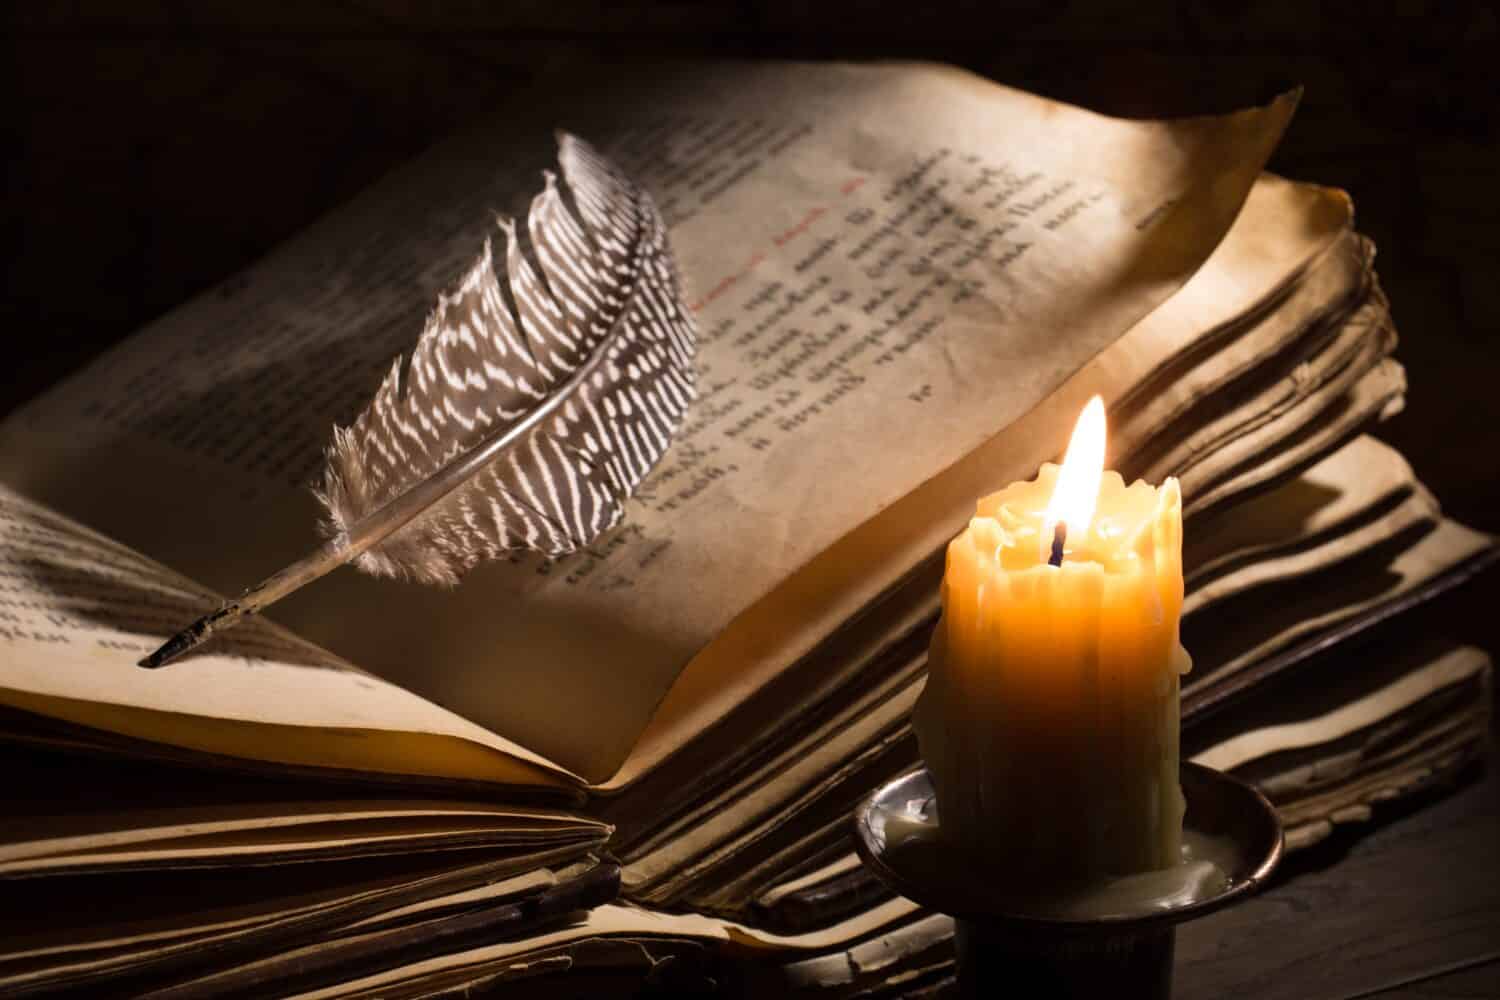 Lighting candle near a medieval book. Vintage still life with open old book.